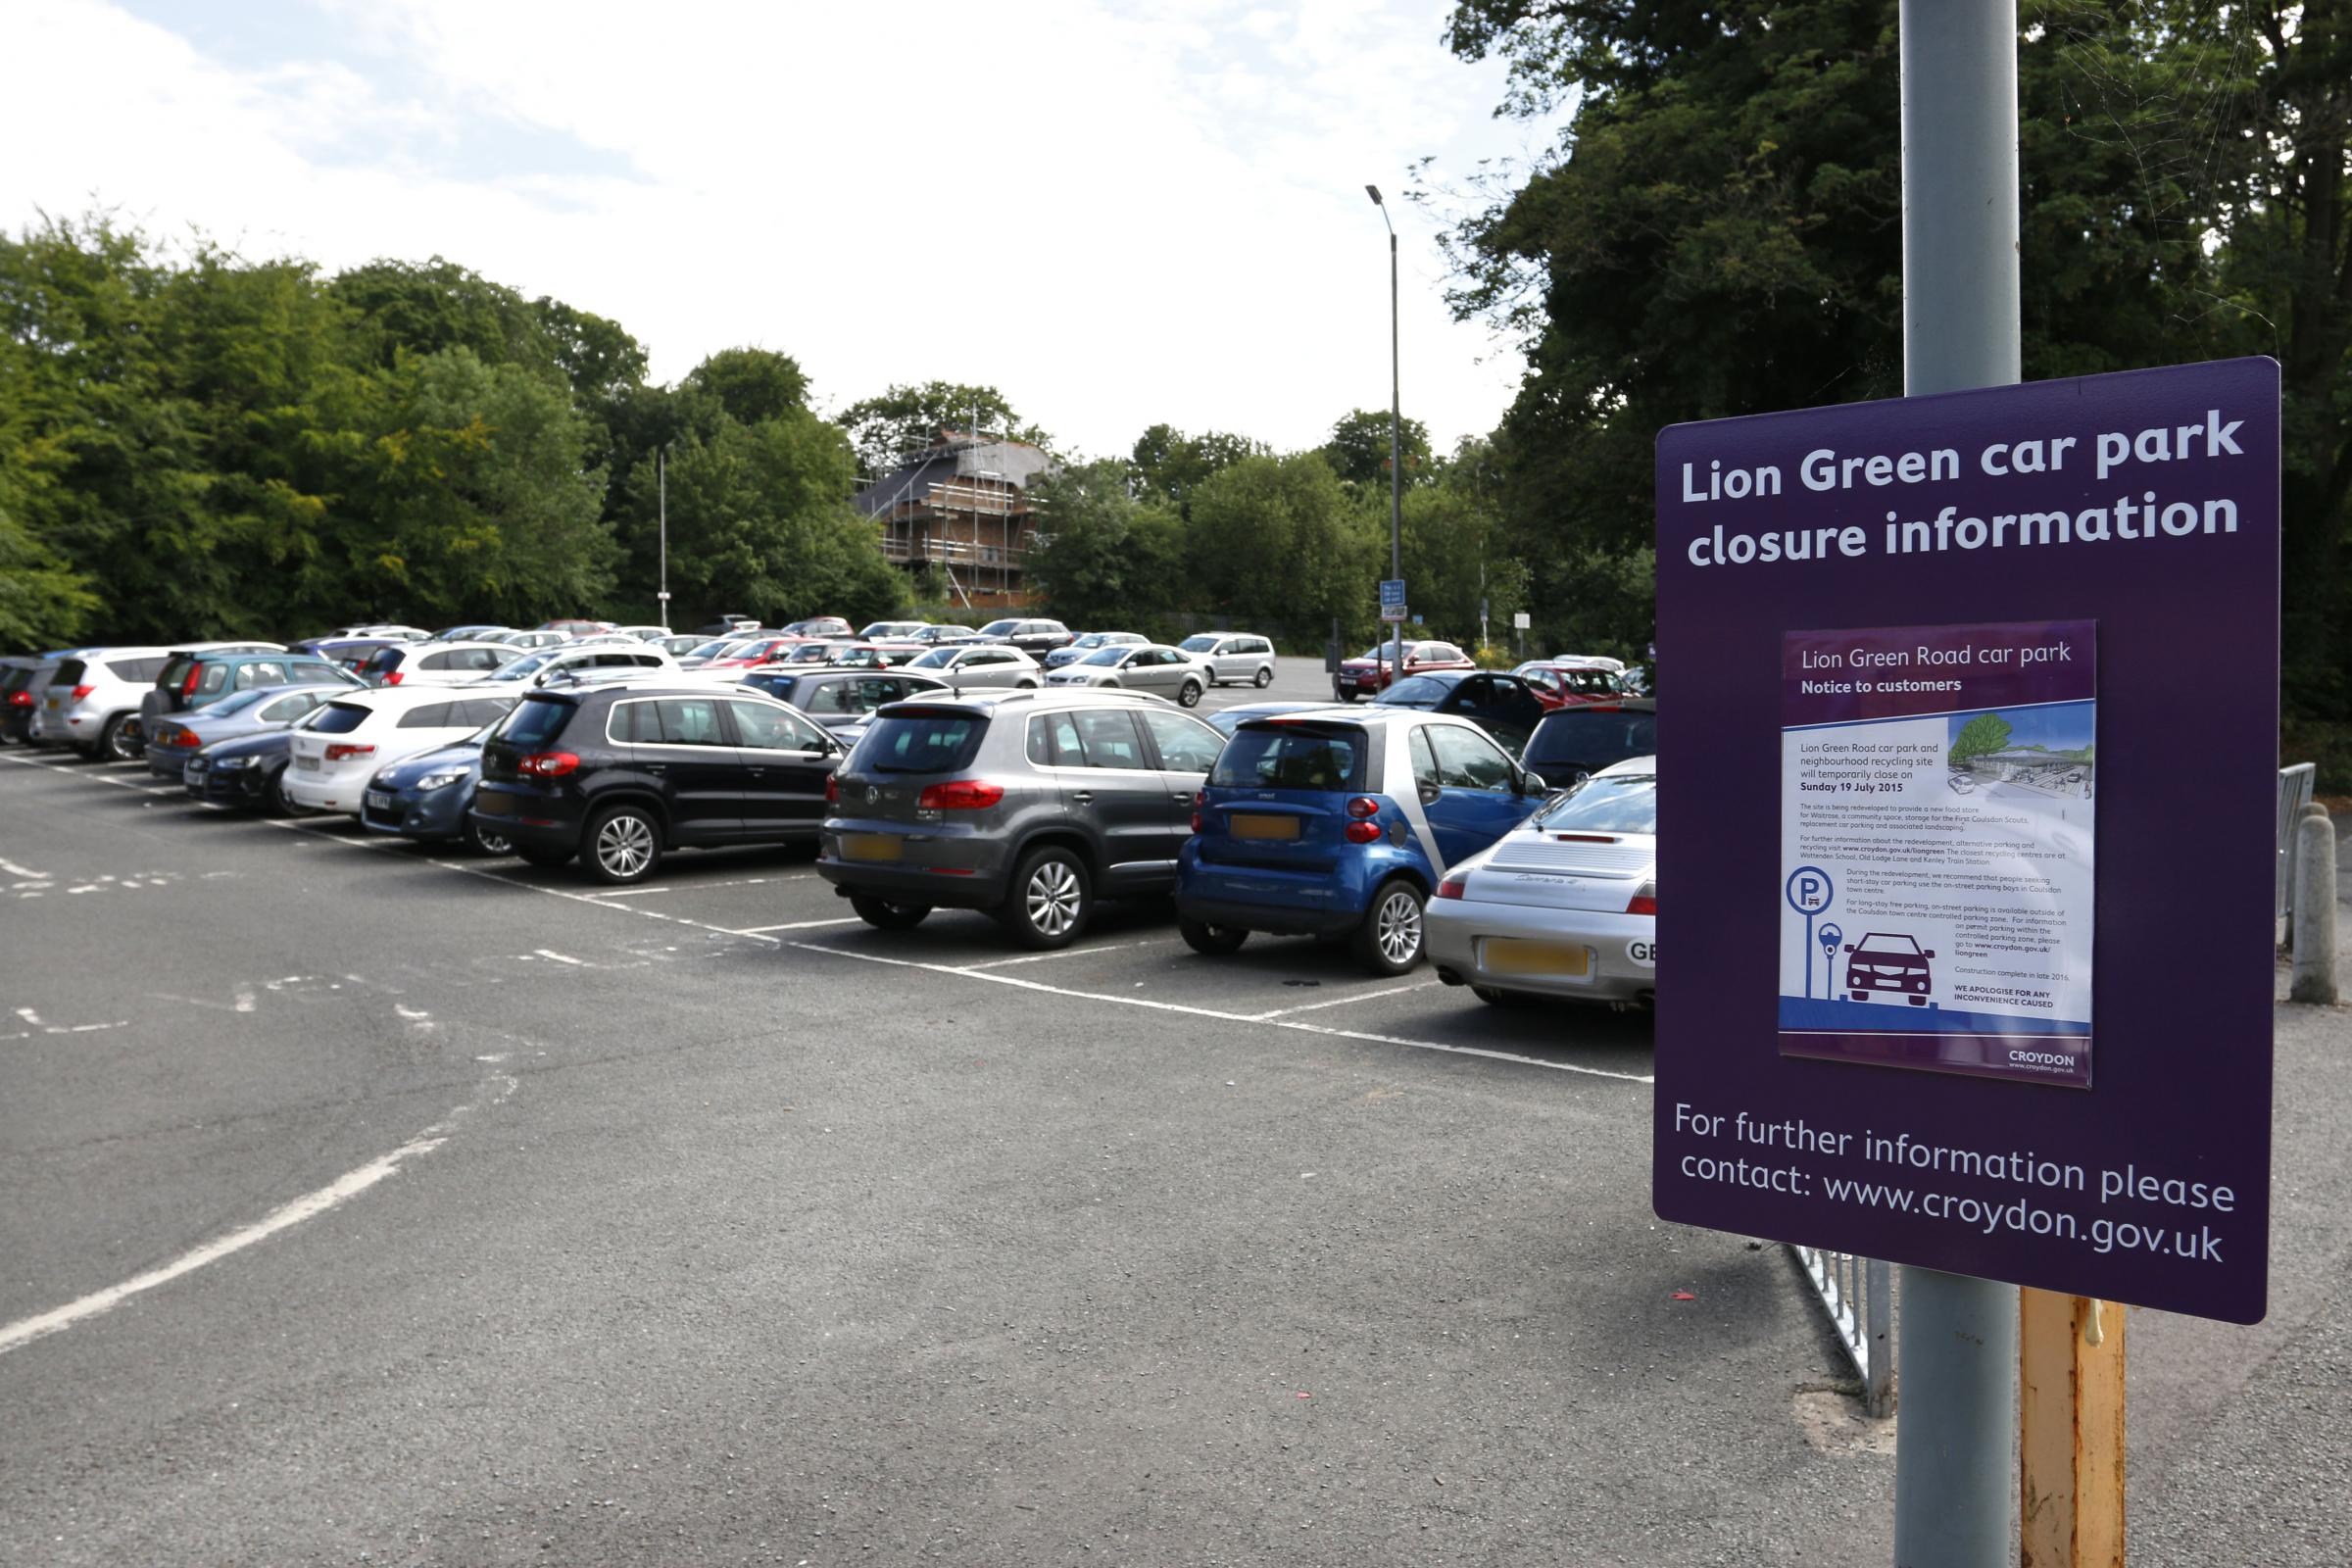 Parking free over festive period